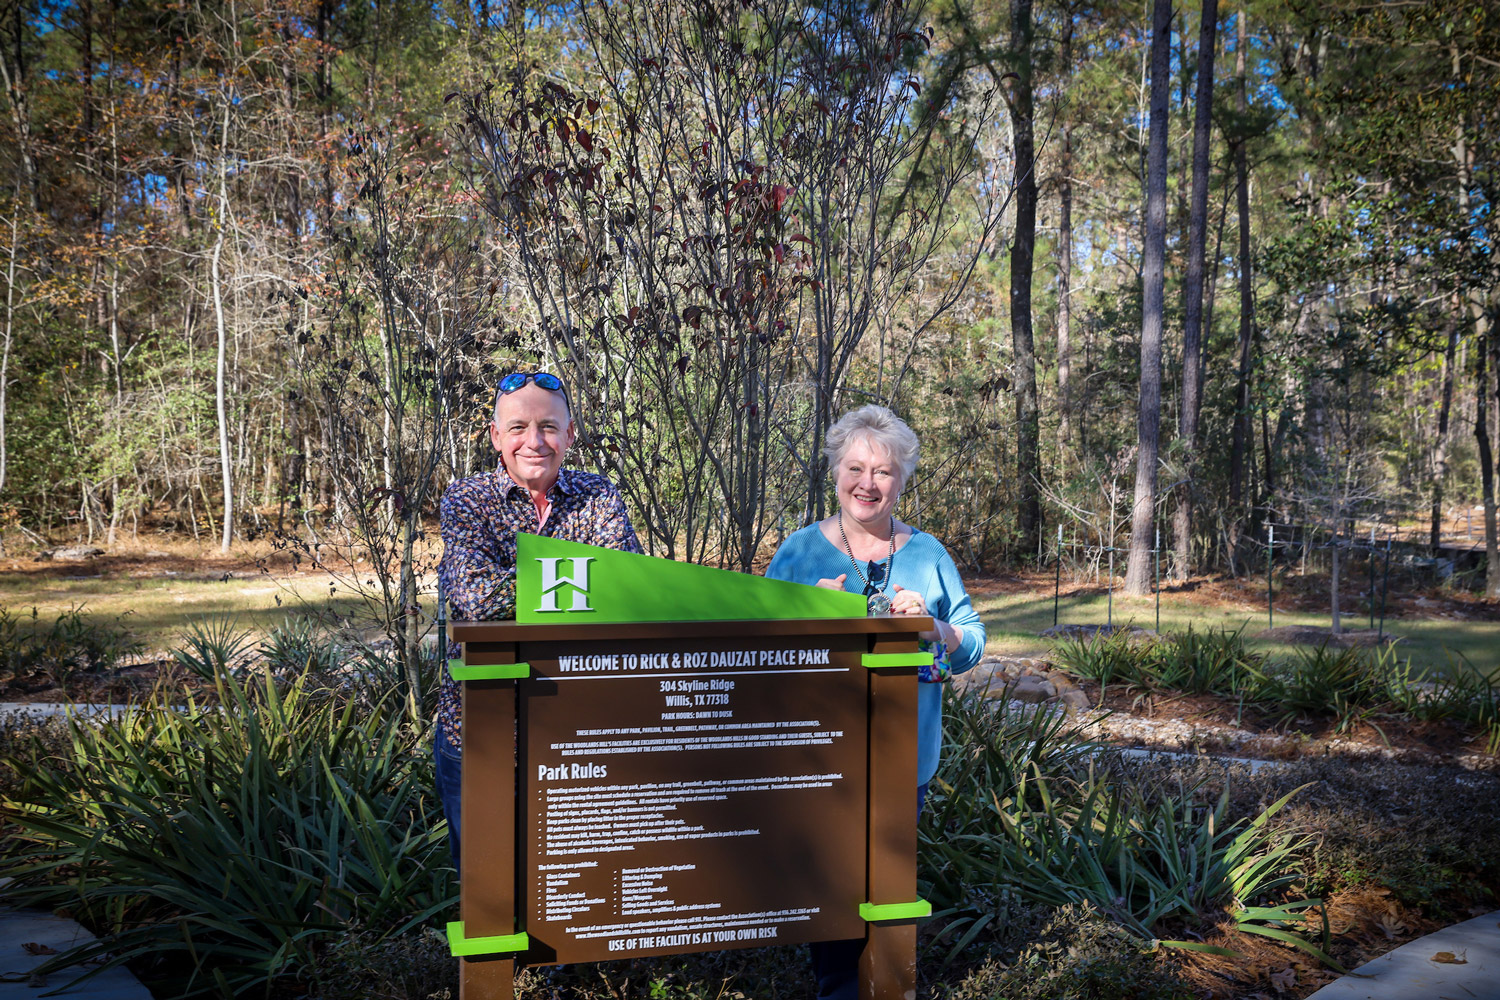 Ribbon Cutting Ceremony Held to Commemorate The Newly Opened “Rick and Roz Dauzat Peace Park”